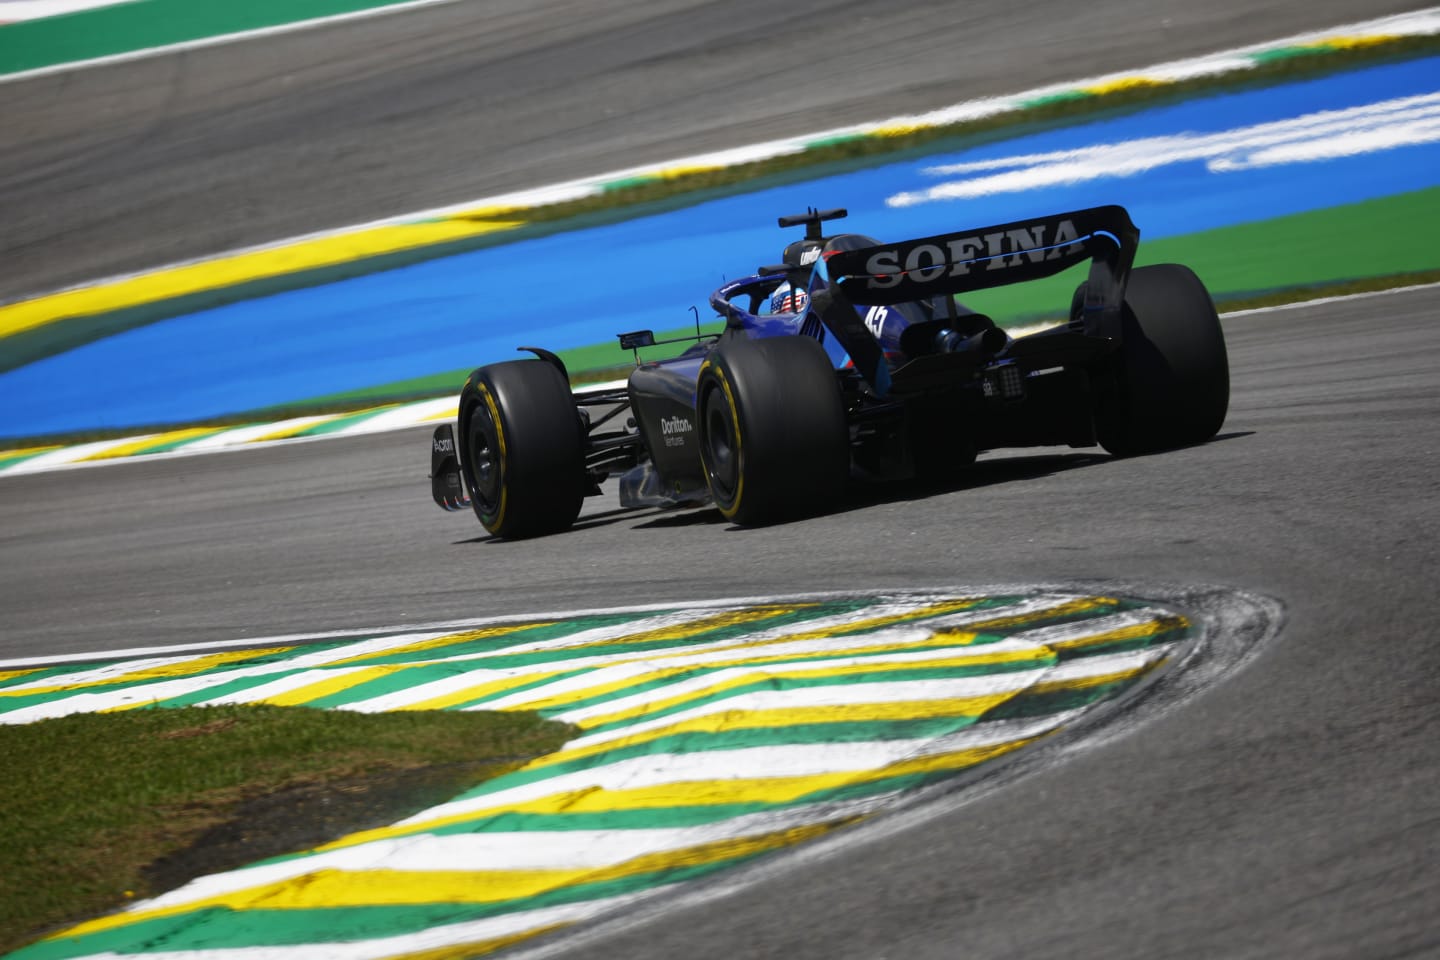 SAO PAULO, BRAZIL - NOVEMBER 12: Alexander Albon of Thailand driving the (23) Williams FW44 Mercedes on track during practice ahead of the F1 Grand Prix of Brazil at Autodromo Jose Carlos Pace on November 12, 2022 in Sao Paulo, Brazil. (Photo by Chris Graythen/Getty Images)